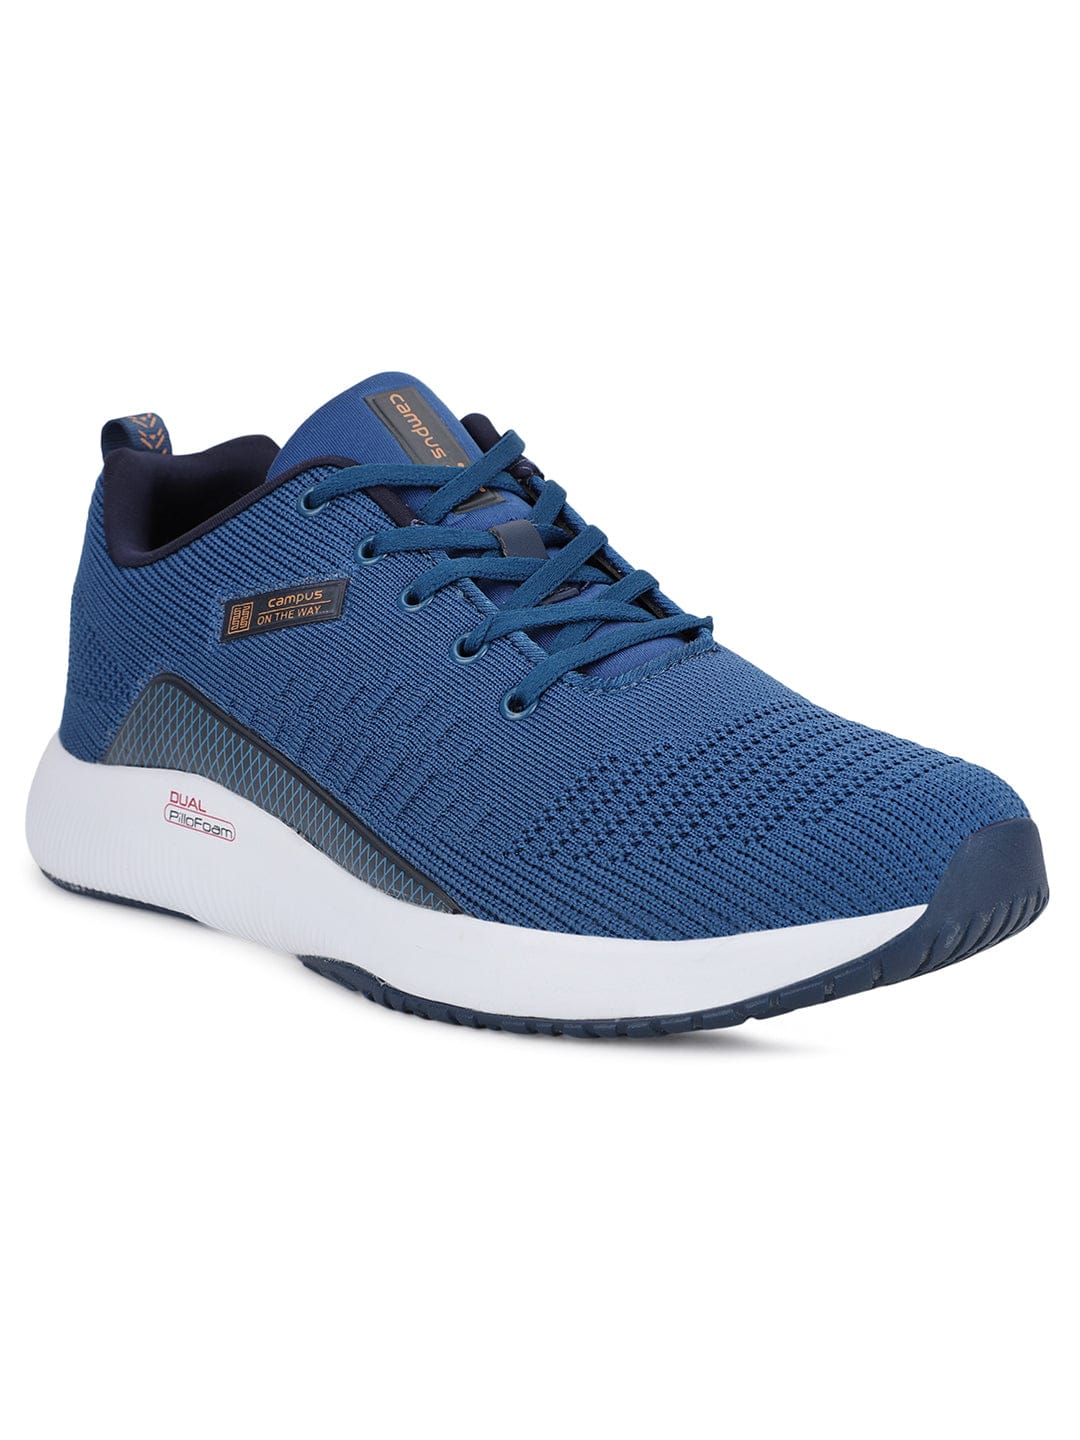 Buy Running Shoes For Men: Toll-Mod-Blu-Mstd | Campus Shoes